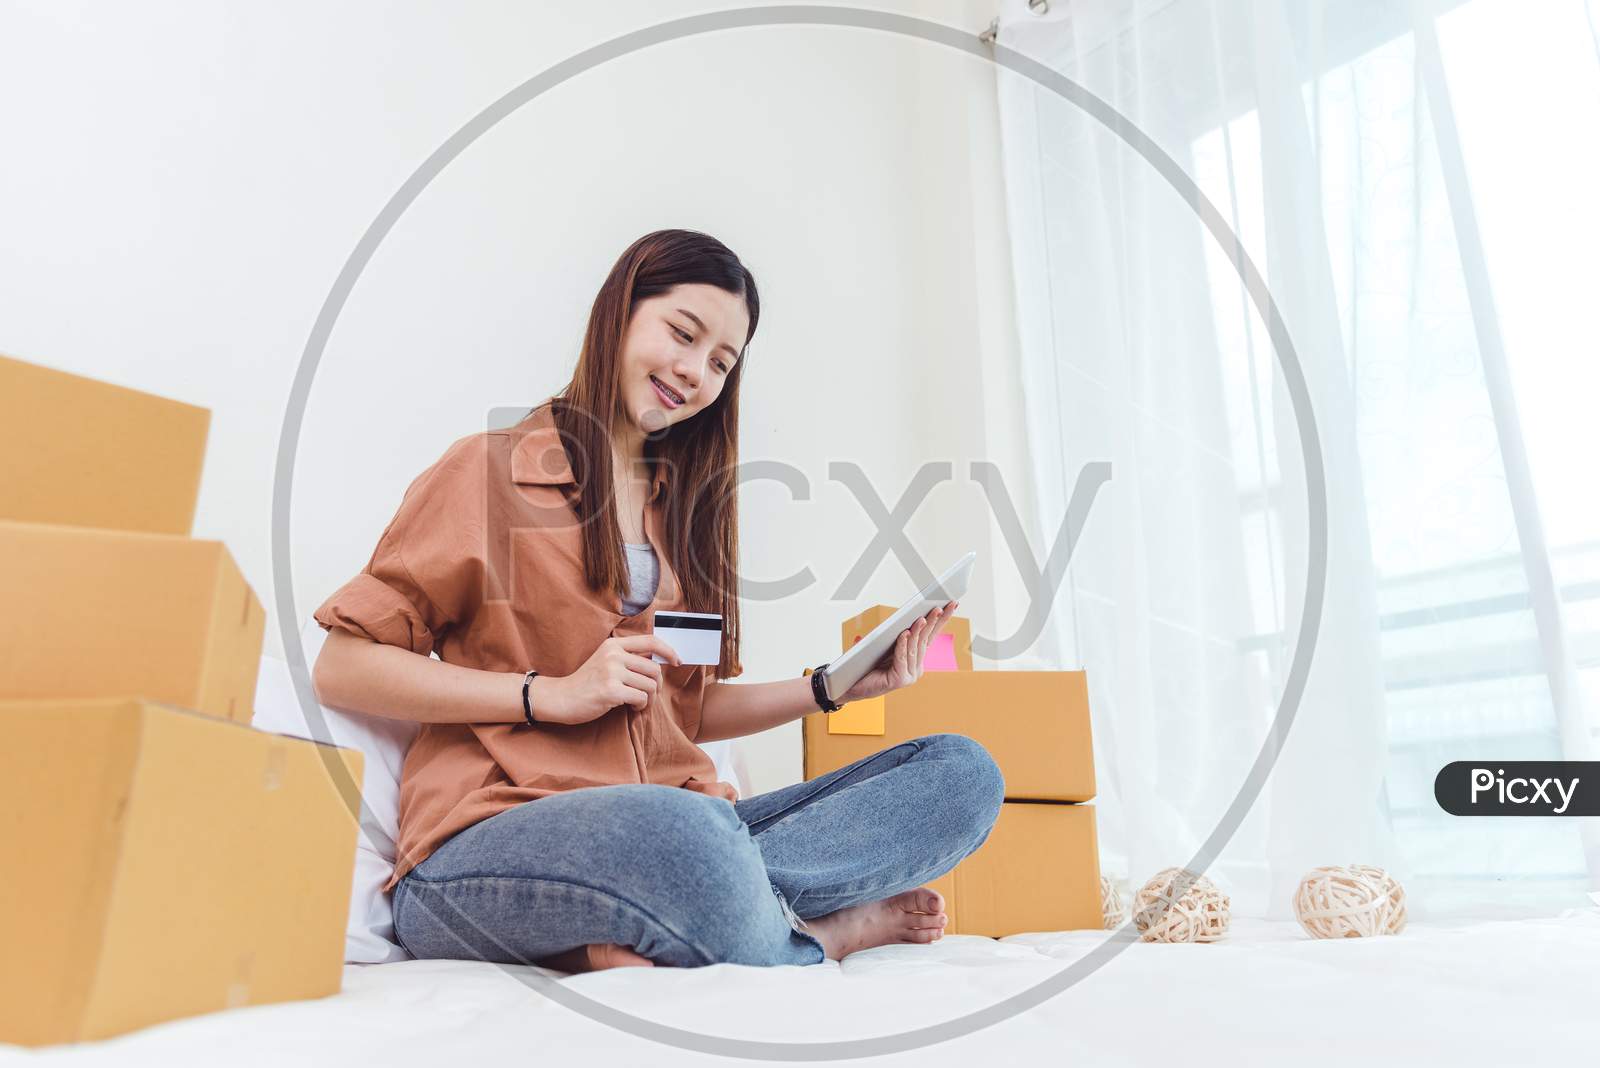 Beauty Asian Woman Using Tablet And Credit Card. Start Up Small Business Entrepreneur Sme And Checking Order List In Bedroom, Young Happy Freelance Woman Shopping Online Marketing Or Sending Parcel